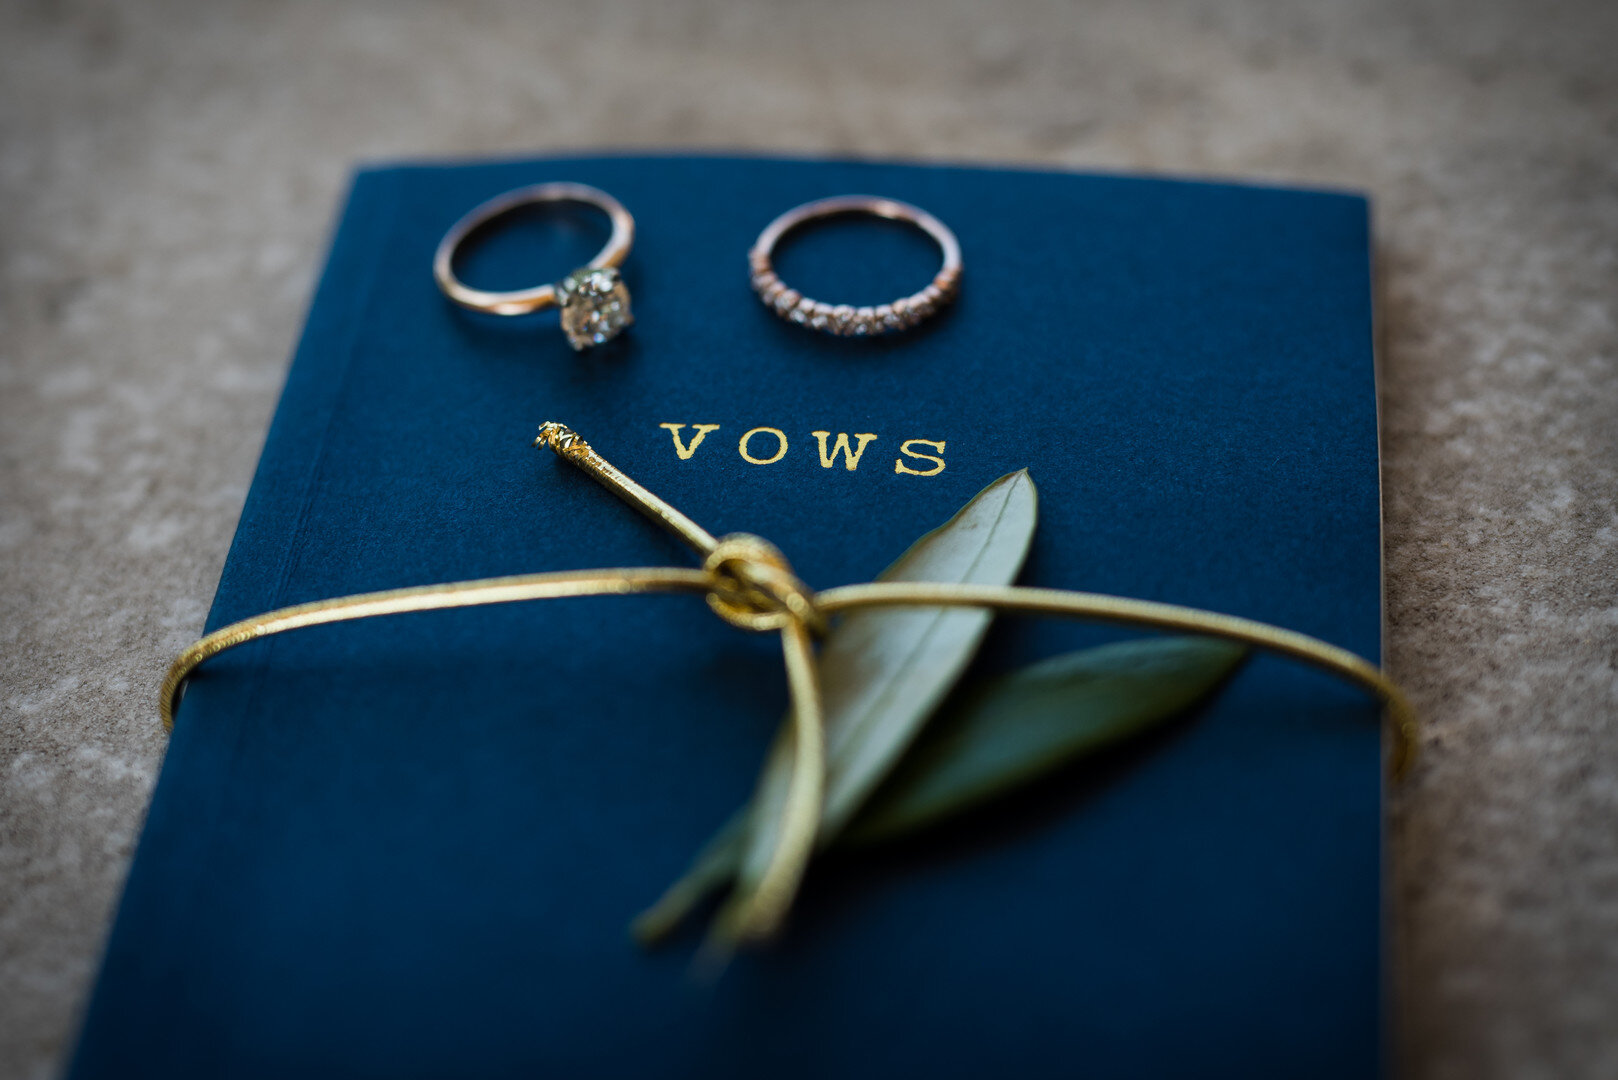 Blue wedding vow book: Golden Hour Armour House Chicago Wedding captured by Inspired Eye Photography featured on CHI thee WED. Find more wedding ideas at CHItheeWED.com!